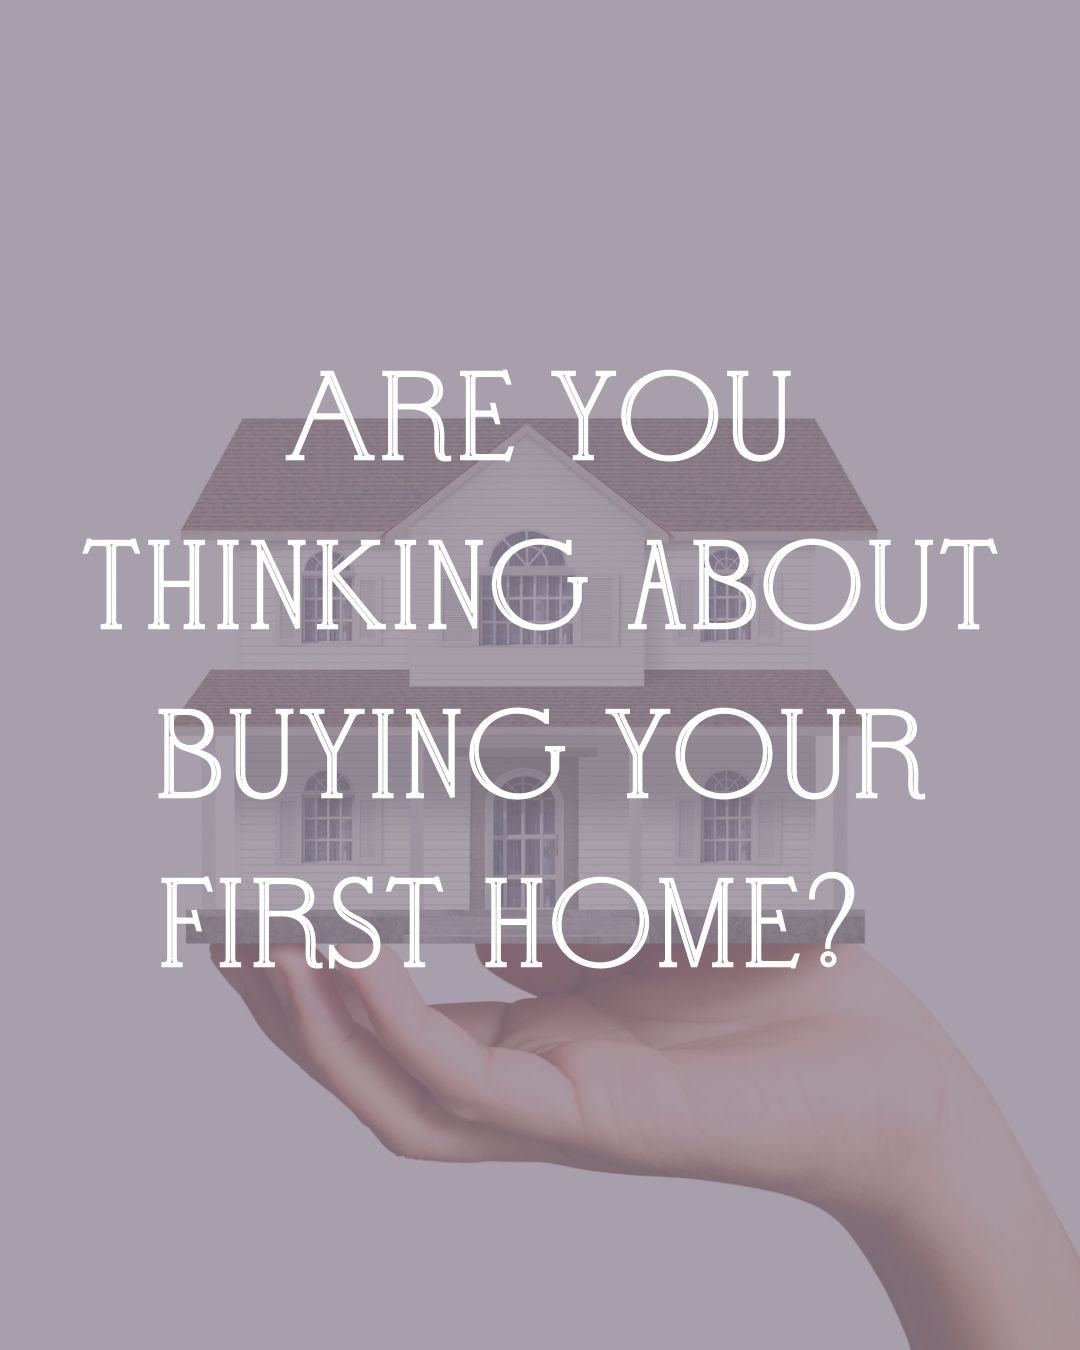 🏡✨ Dreaming of your first home but unsure about financing? You&rsquo;re not alone! 
 
🌟 I&rsquo;m here to guide you through 3 fantastic government programs designed to help first-time buyers like you step confidently onto the property ladder. 
 
🚀